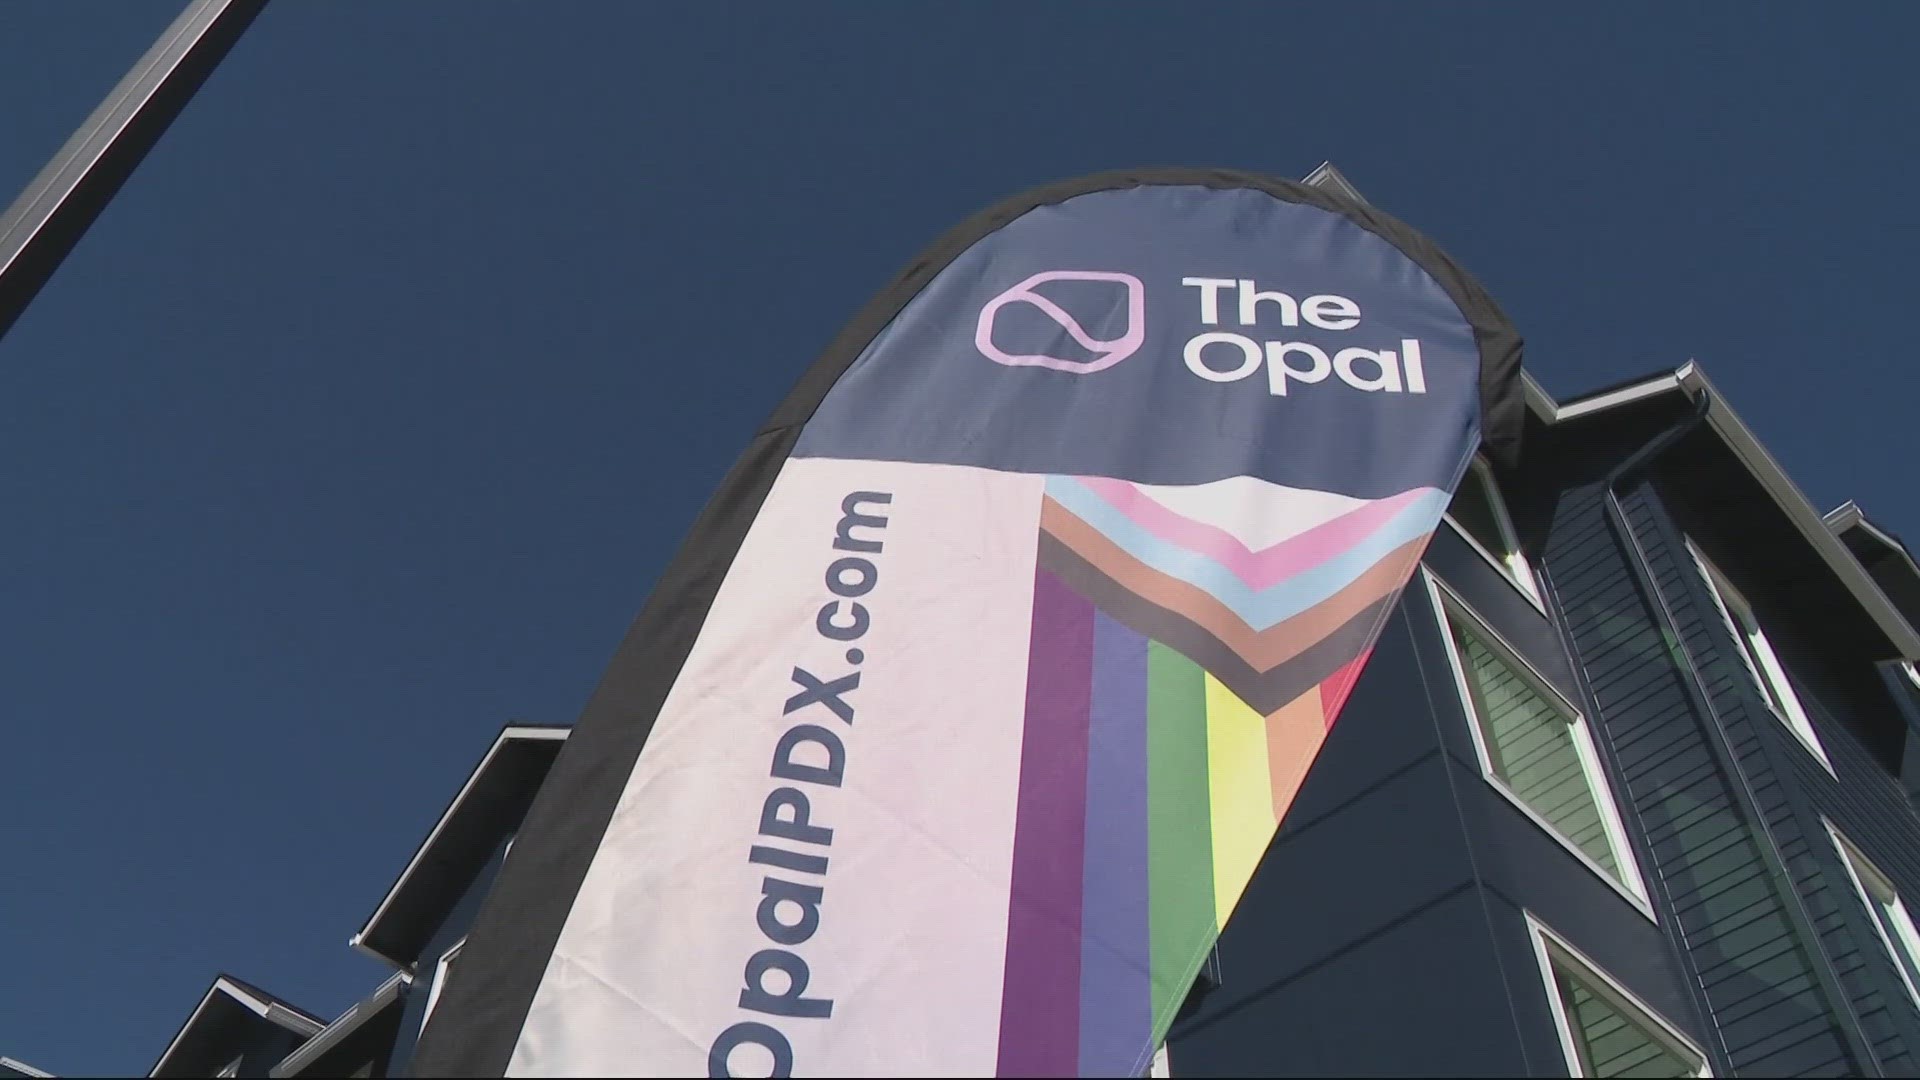 The Opal sits on land donated by Christ United Methodist Church. It's for adults who are 55 years old or older, and those in the LGBTQ+ community.